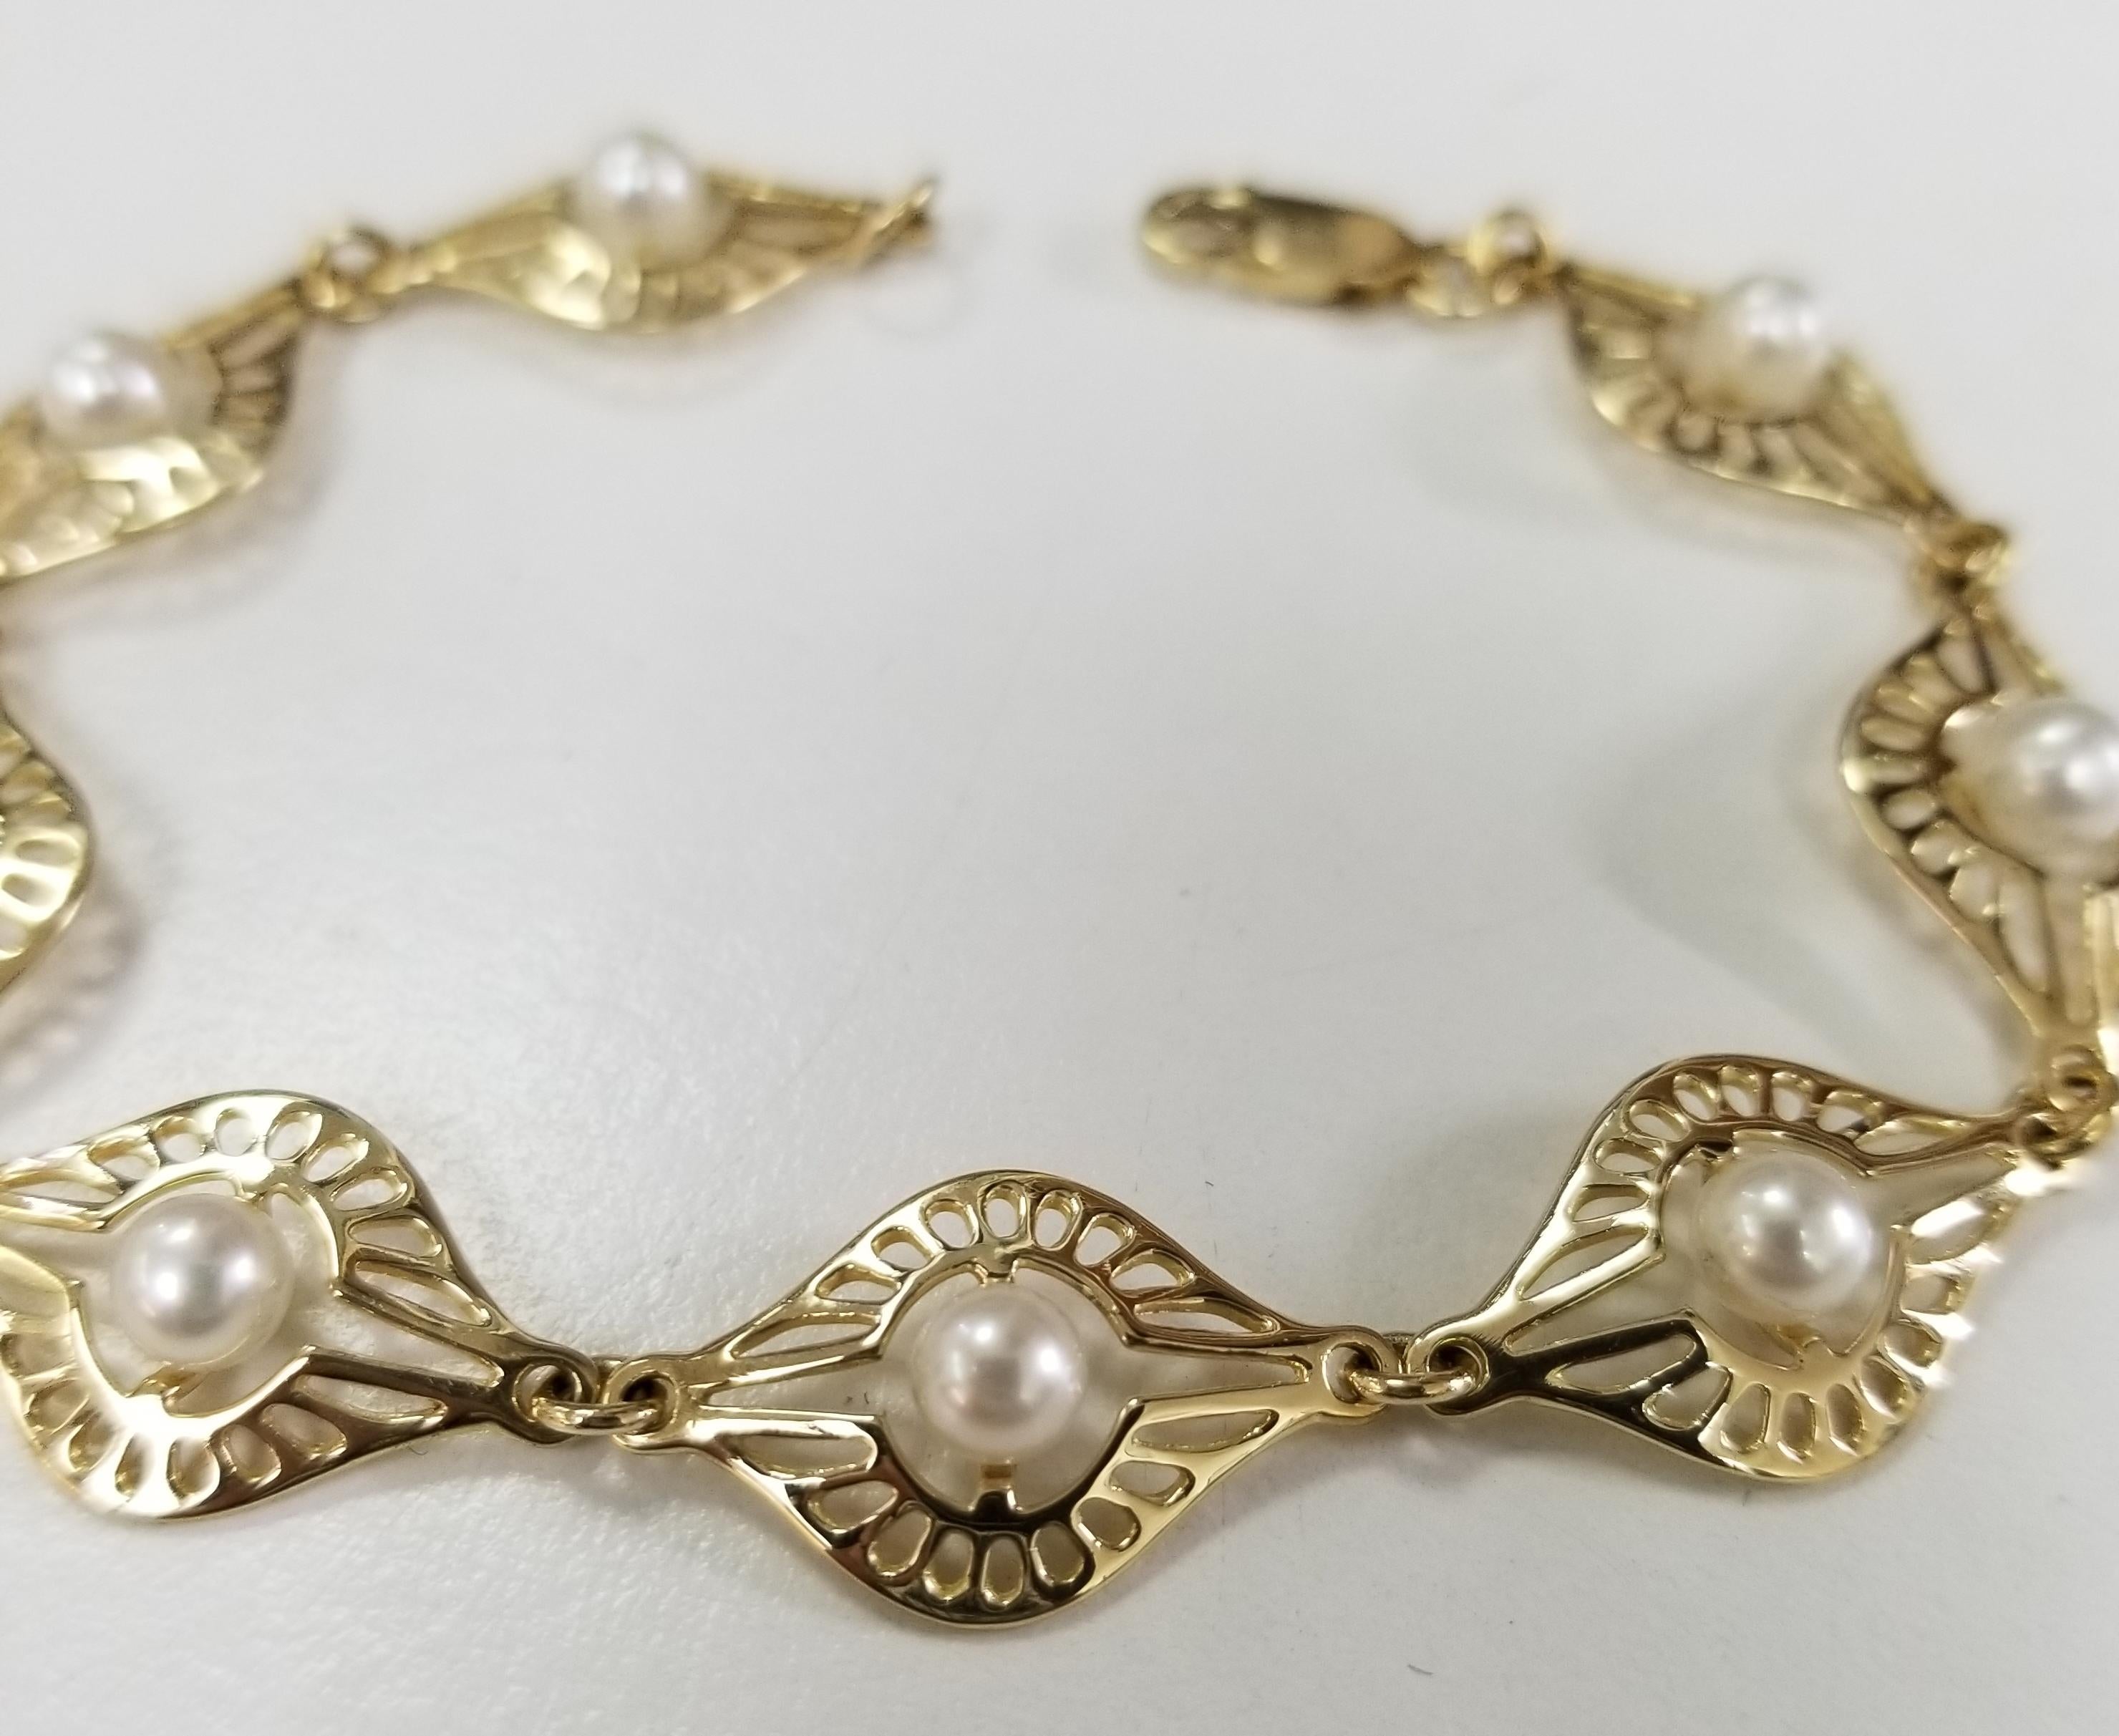 14 karat yellow gold pearl bracelet containing 8 5mm pearls, length of bracelet 7 1/2 inches.